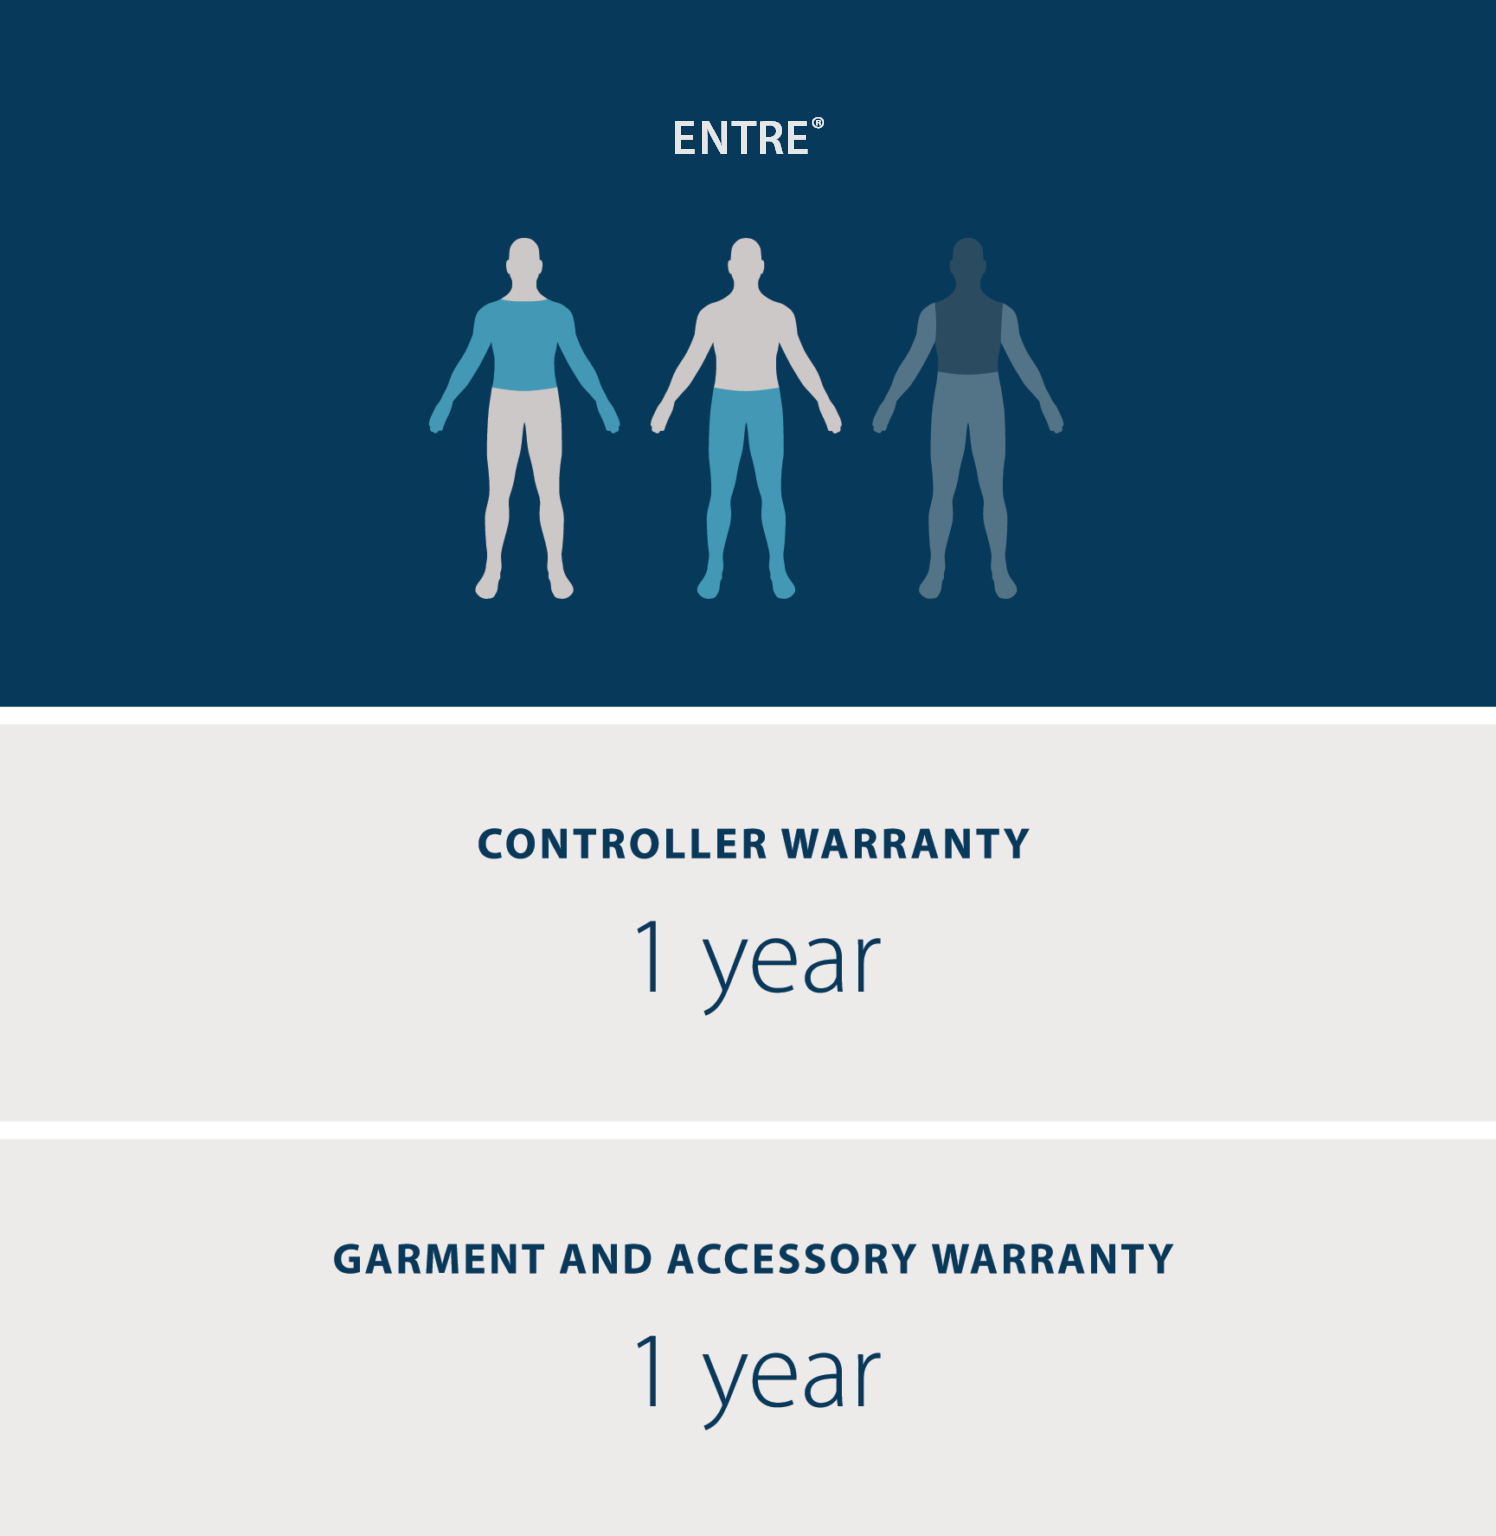 entre warranty controller warranty is one year. garment and accessory warranty is one year.